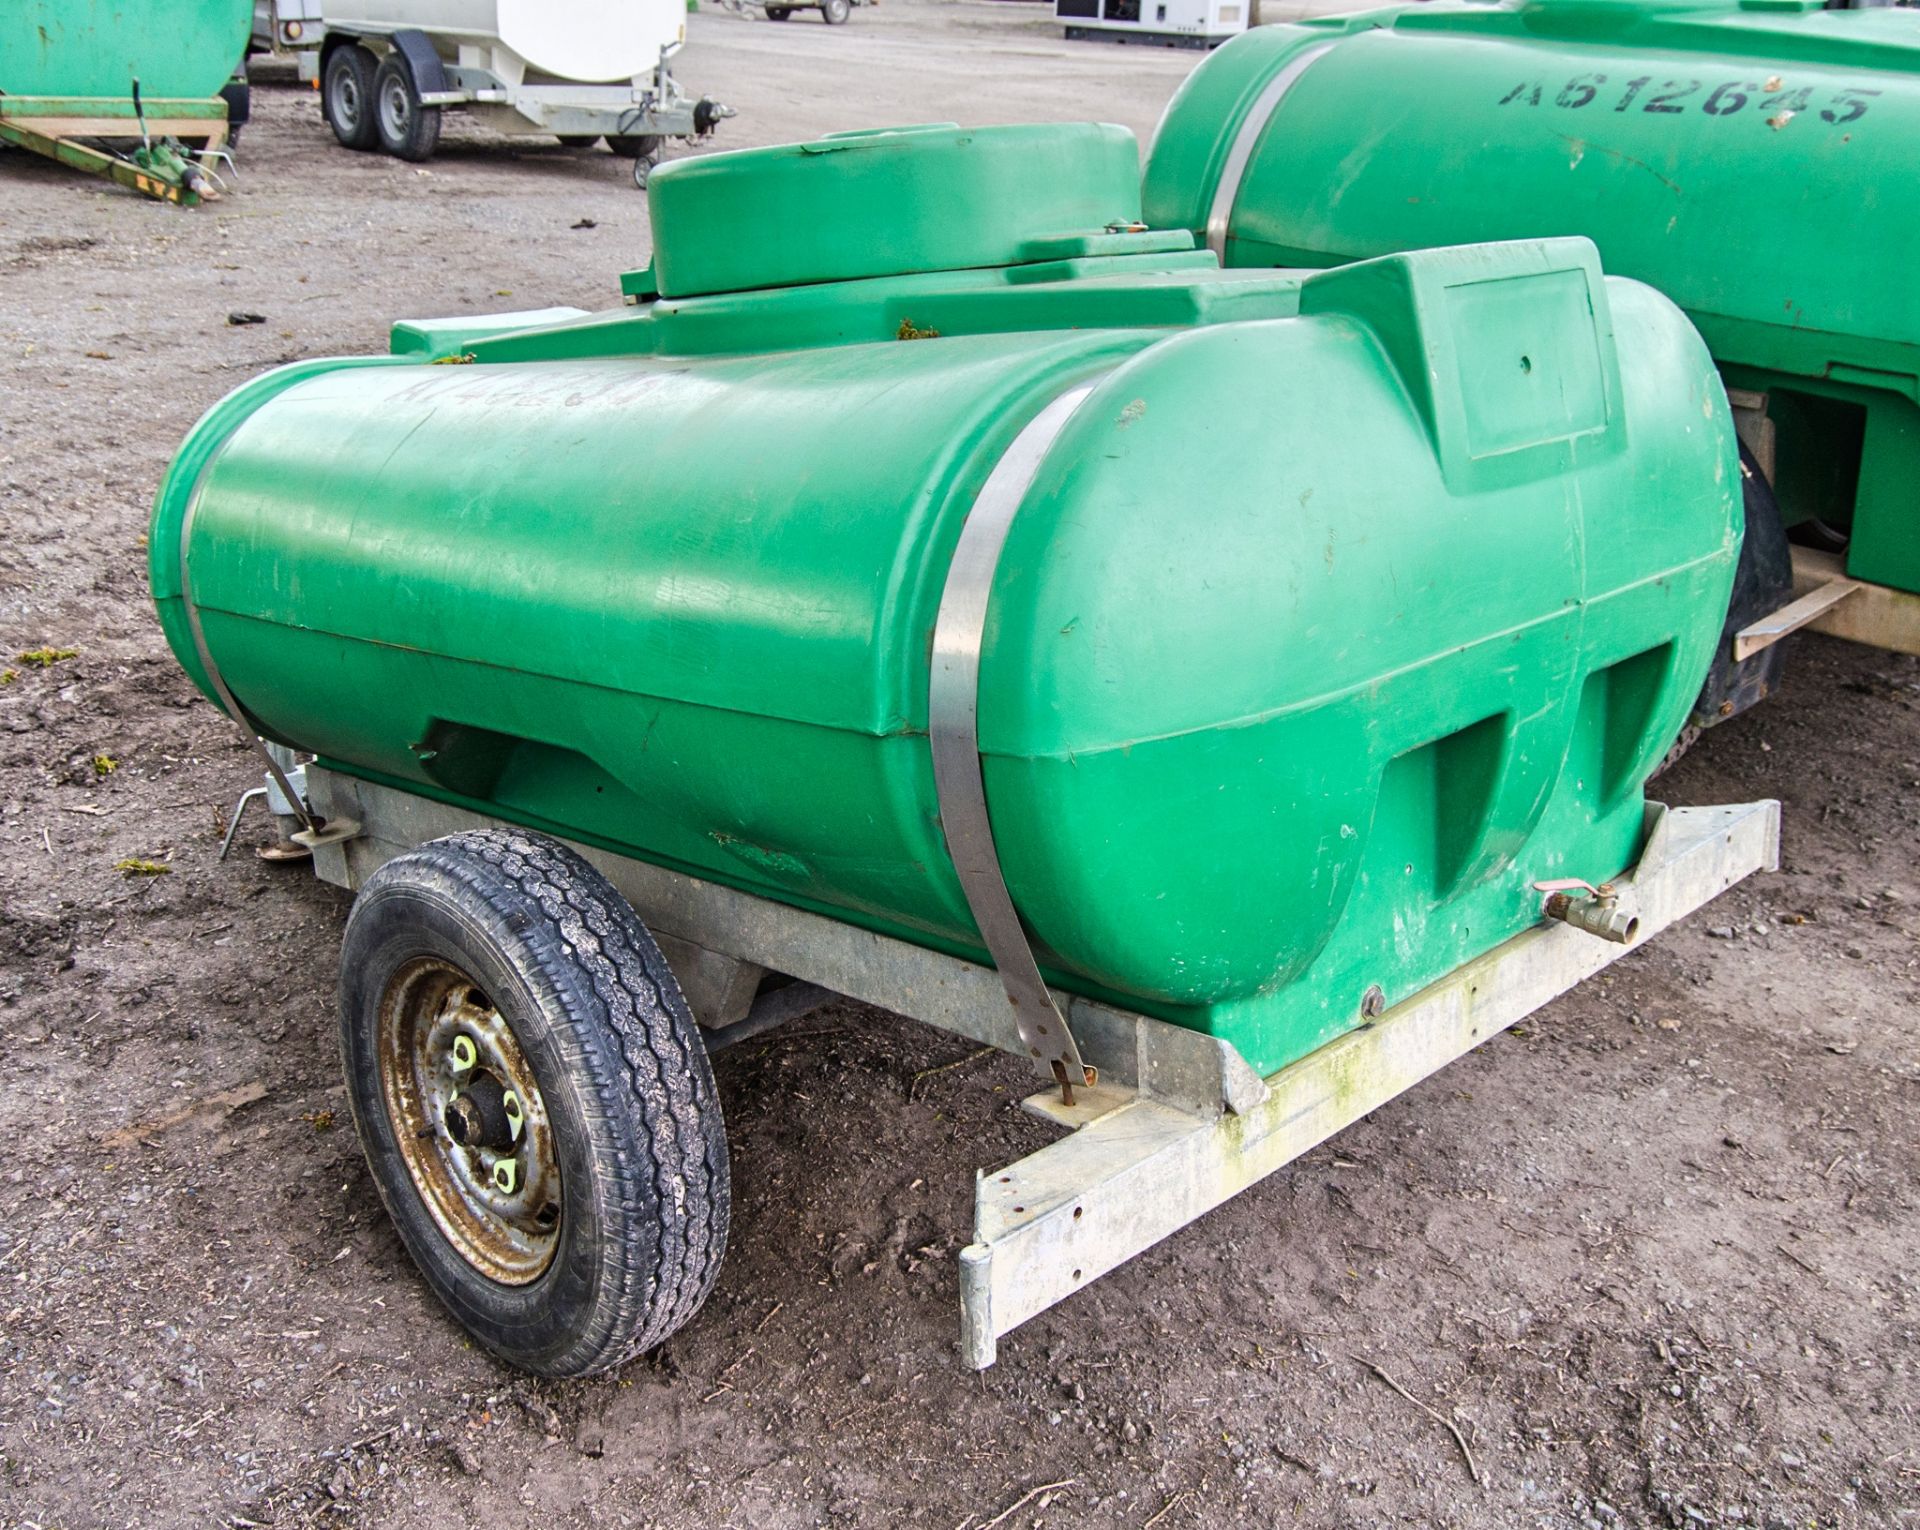 Trailer Engineering 1000 litre site tow mobile water bowser A748236 - Bild 4 aus 6